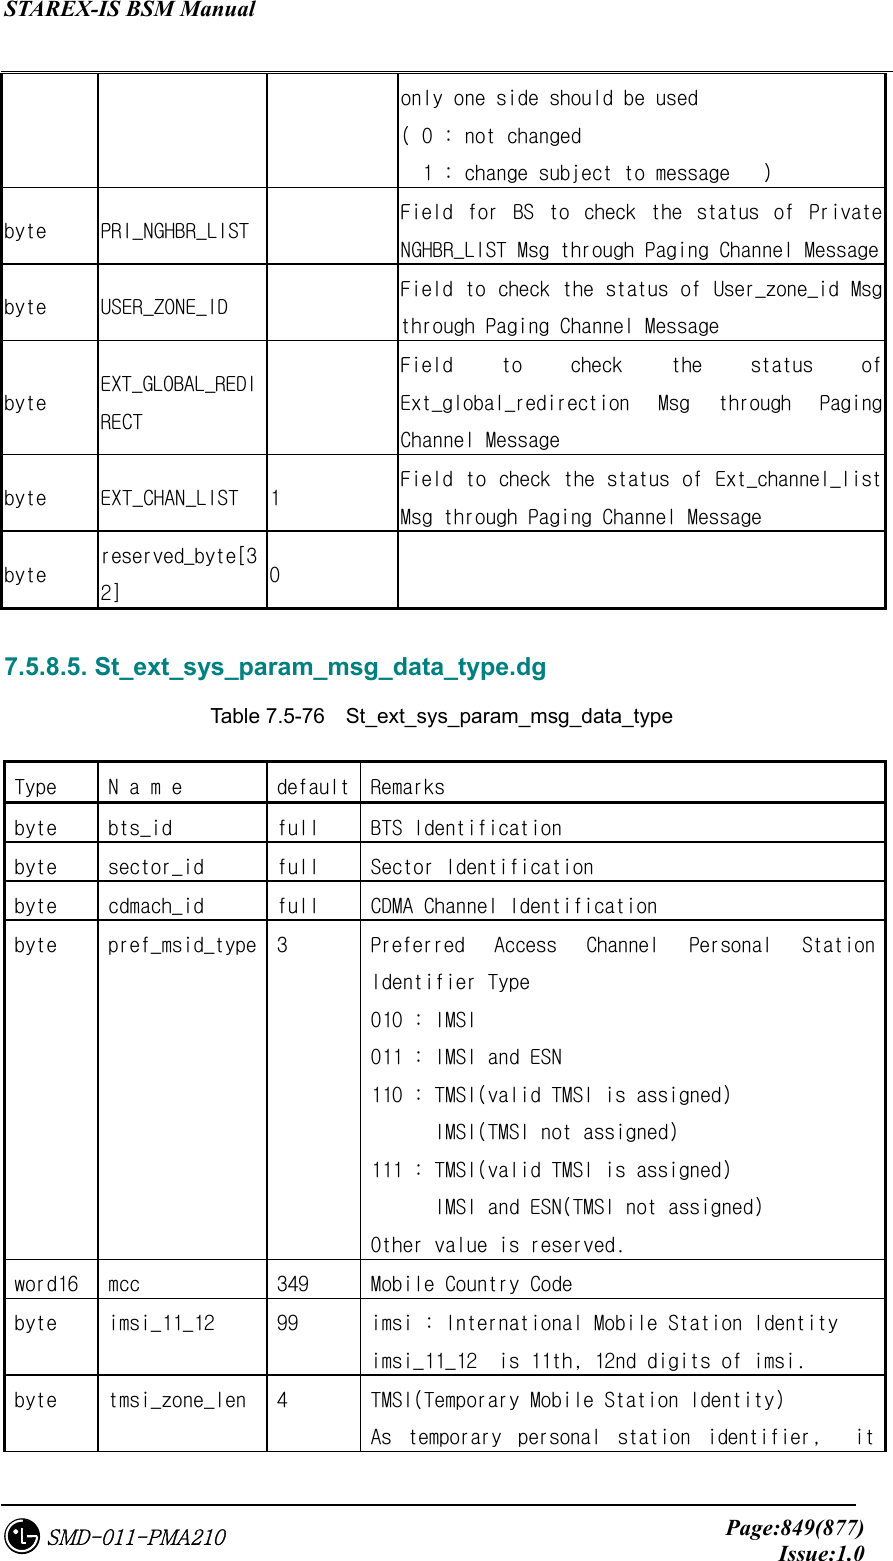 STAREX-IS BSM Manual     Page:849(877)Issue:1.0SMD-011-PMA210 only one side should be used  ( 0 : not changed    1 : change subject to message   ) byte  PRI_NGHBR_LIST    Field  for  BS  to  check  the  status  of  Private NGHBR_LIST Msg through Paging Channel Message byte  USER_ZONE_ID    Field to check the status of User_zone_id Msg through Paging Channel Message byte  EXT_GLOBAL_REDIRECT   Field  to  check  the  status  of Ext_global_redirection  Msg  through  Paging Channel Message  byte  EXT_CHAN_LIST  1  Field to  check the status  of Ext_channel_list Msg through Paging Channel Message byte  reserved_byte[32]  0    7.5.8.5. St_ext_sys_param_msg_data_type.dg Table 7.5-76  St_ext_sys_param_msg_data_type Type  N a m e  default  Remarks  byte  bts_id  full  BTS Identification byte  sector_id  full  Sector Identification byte  cdmach_id  full  CDMA Channel Identification byte  pref_msid_type  3  Preferred  Access  Channel  Personal  Station Identifier Type 010 : IMSI 011 : IMSI and ESN 110 : TMSI(valid TMSI is assigned)       IMSI(TMSI not assigned) 111 : TMSI(valid TMSI is assigned)       IMSI and ESN(TMSI not assigned) Other value is reserved. word16  mcc  349  Mobile Country Code byte  imsi_11_12  99  imsi : International Mobile Station Identity imsi_11_12  is 11th, 12nd digits of imsi.  byte  tmsi_zone_len  4  TMSI(Temporary Mobile Station Identity) As  temporary  personal  station  identifier,    it 